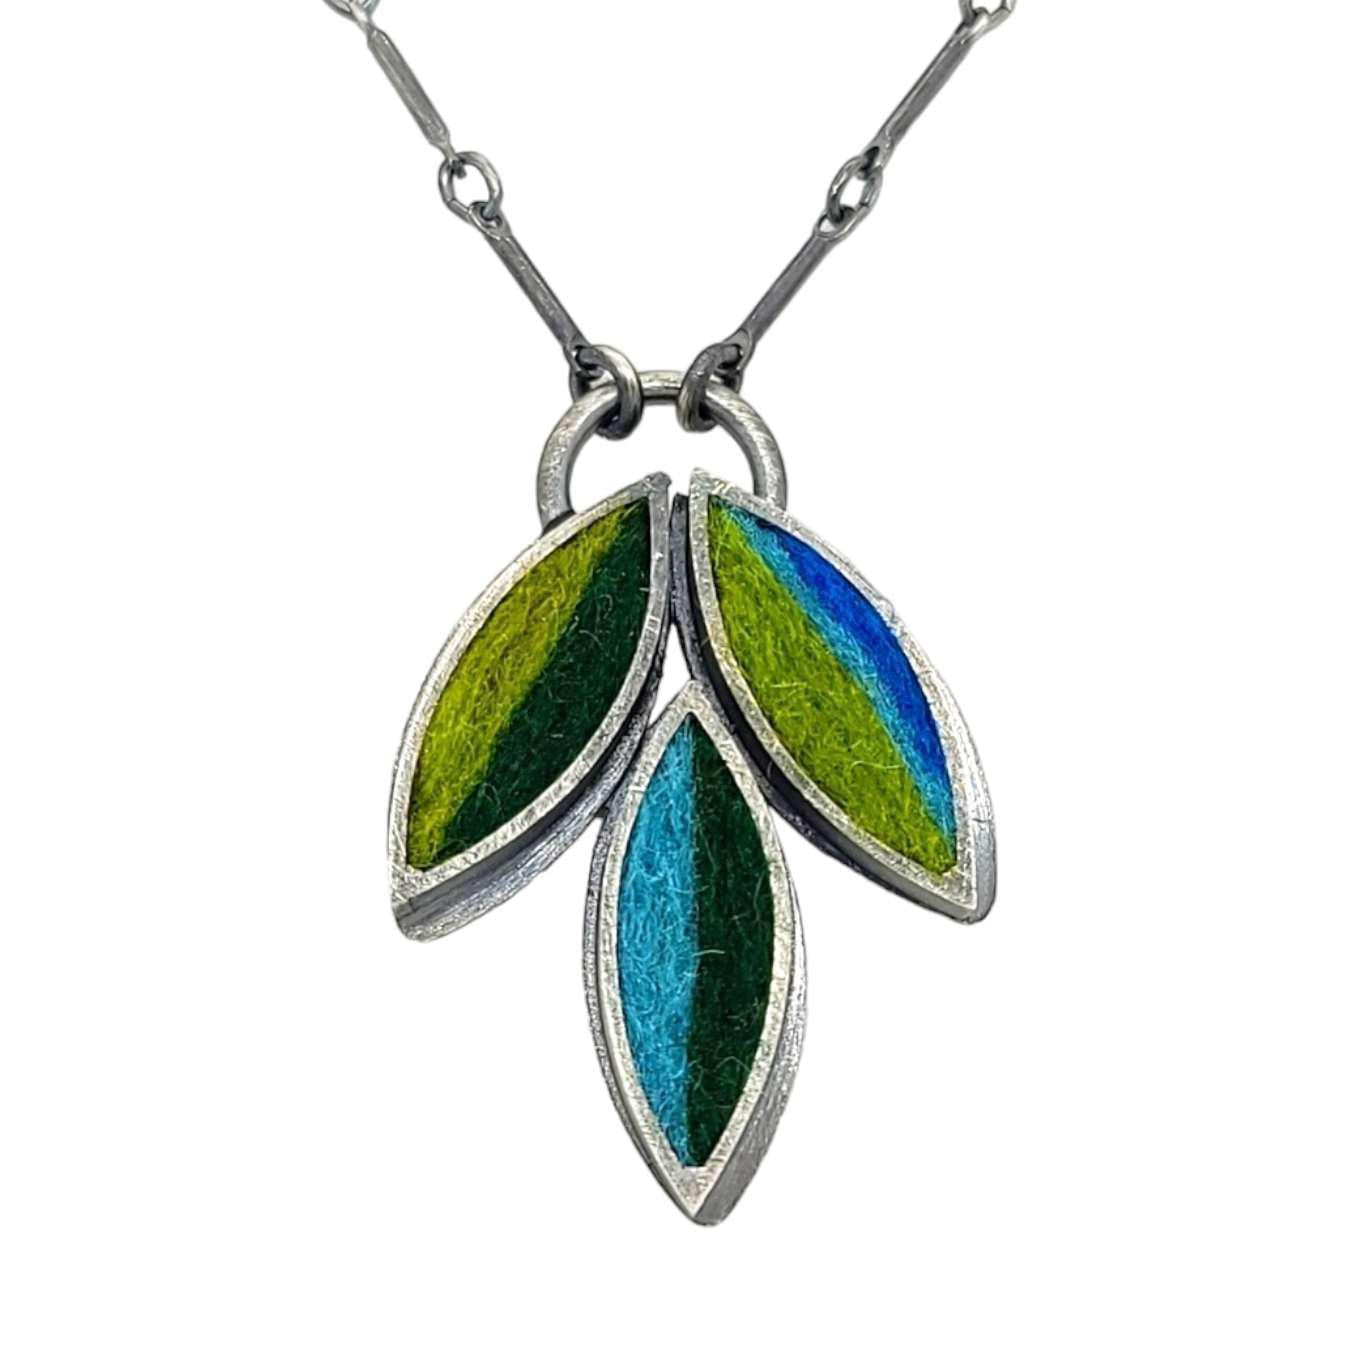 Necklace - Lotus Flower in Blue and Green by Michele A. Friedman